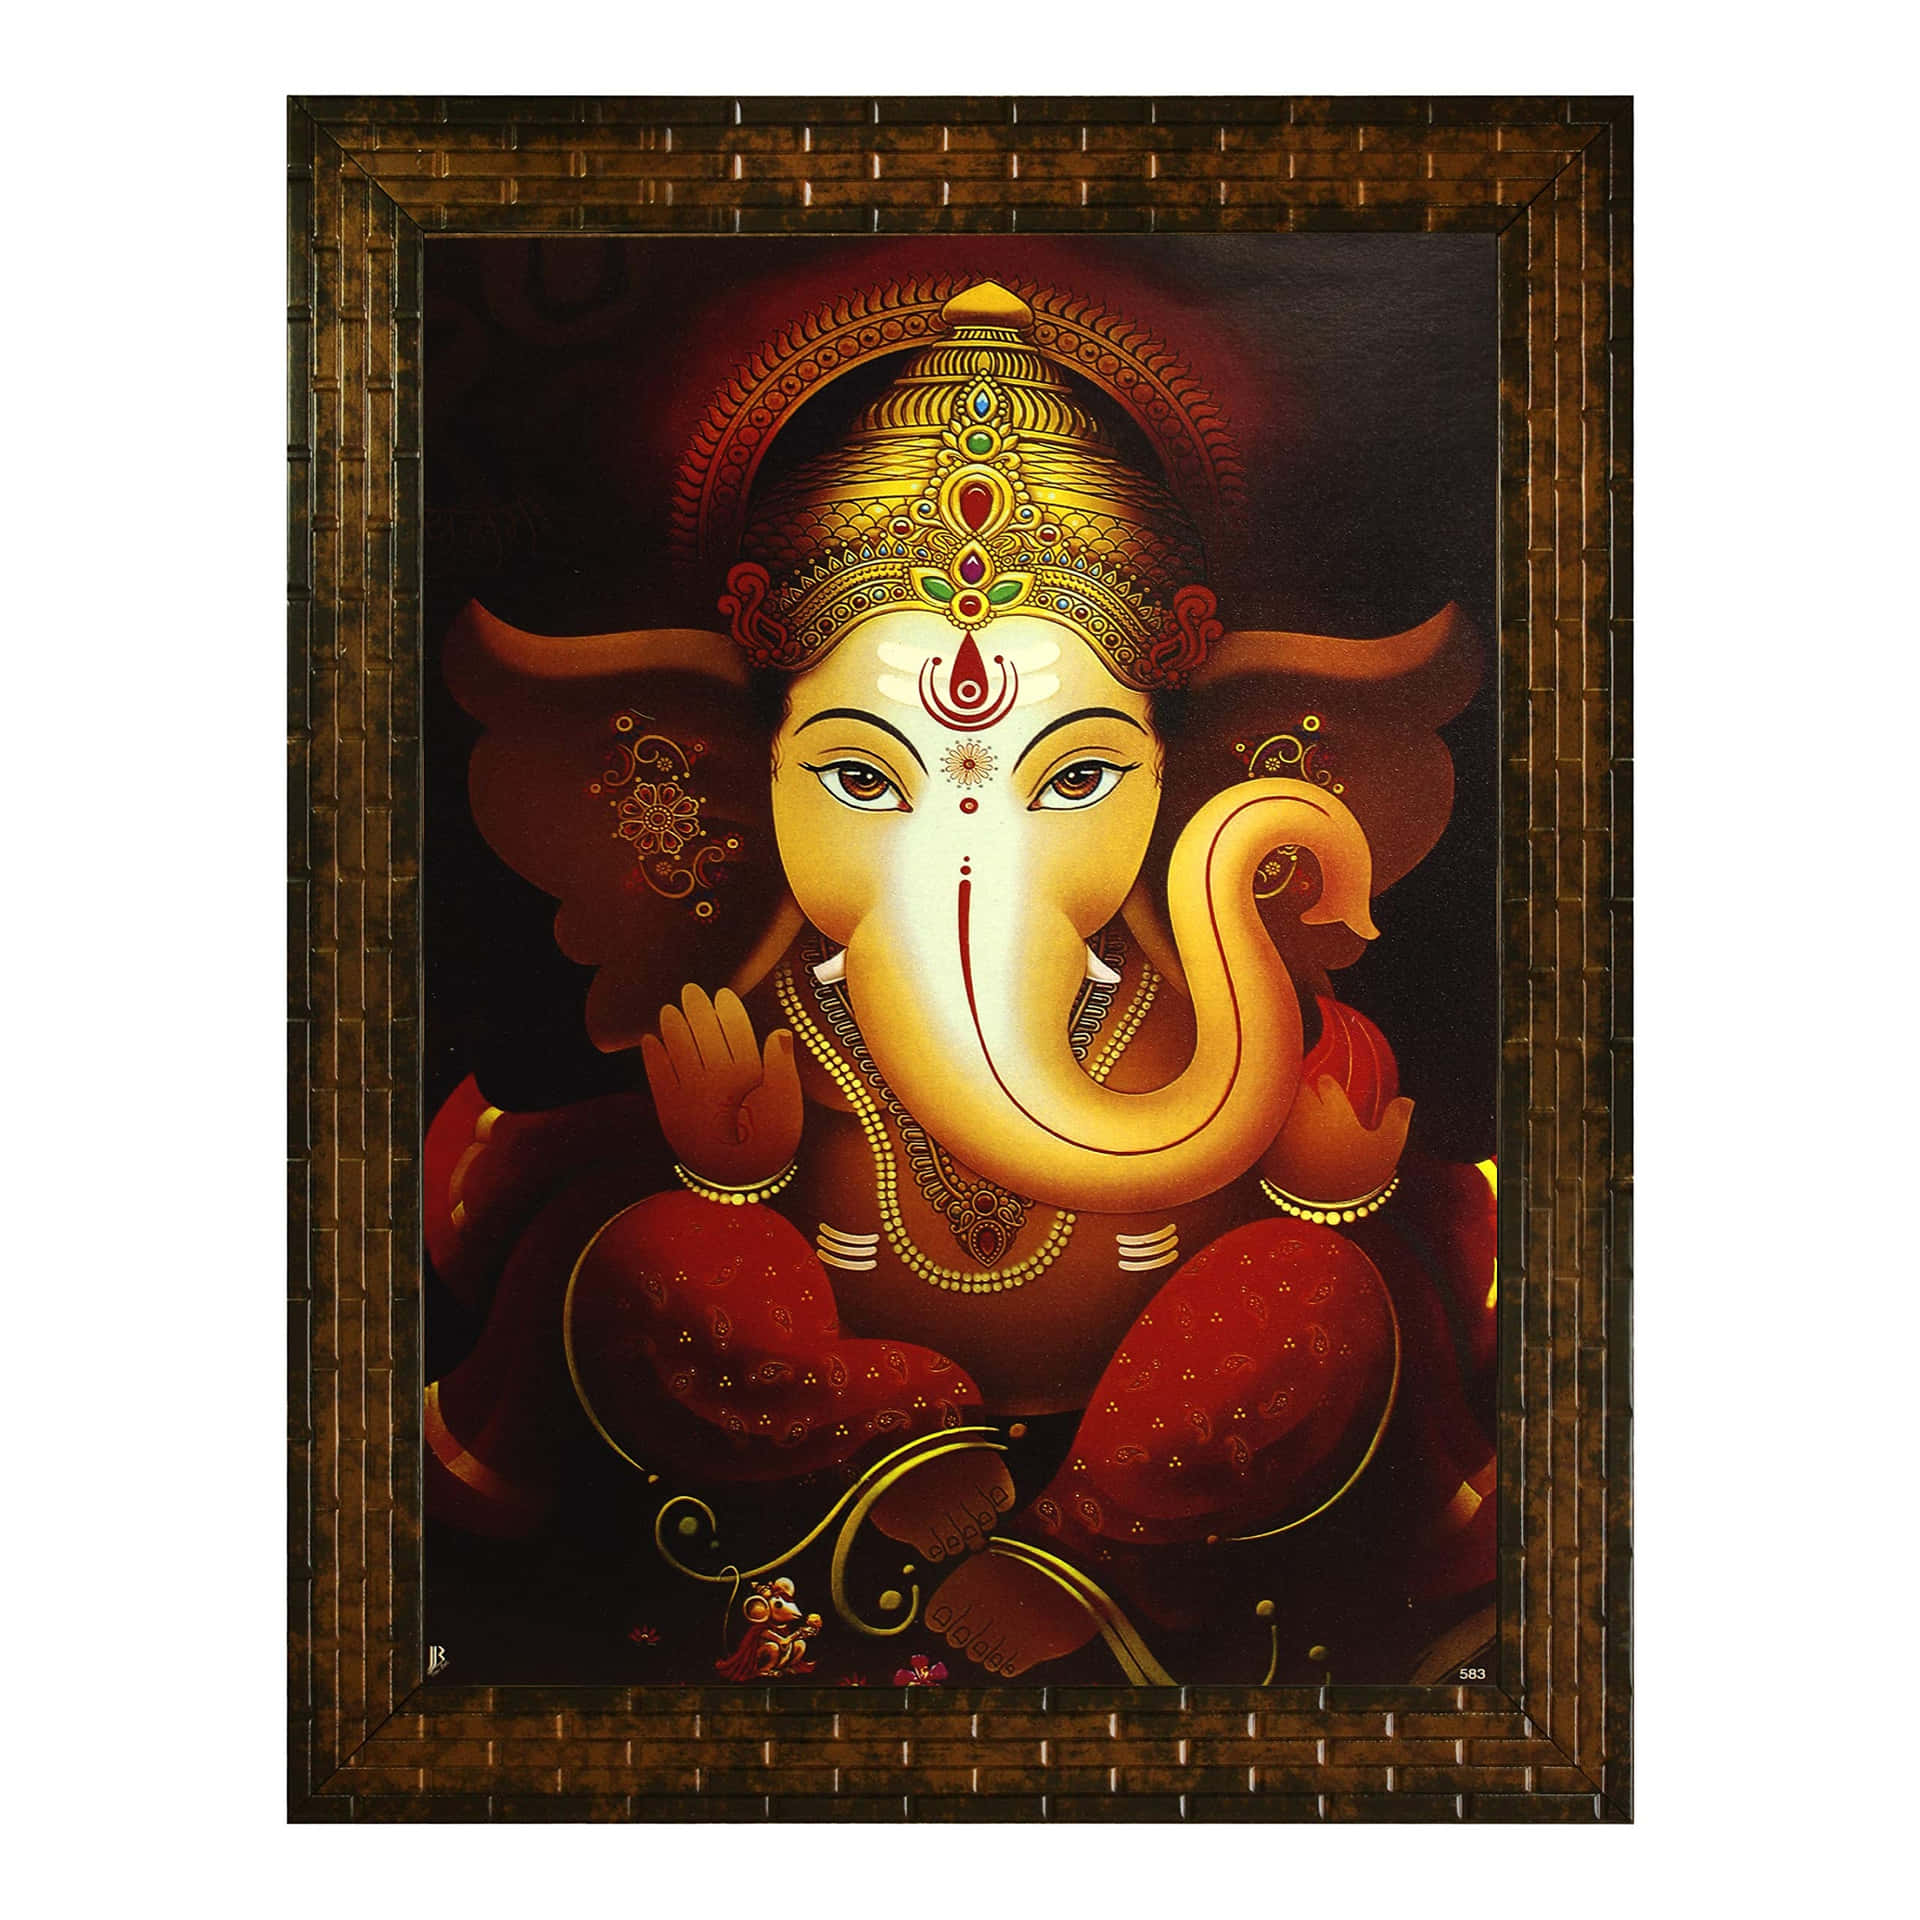 A Framed Painting Of Ganesh In Red And Gold